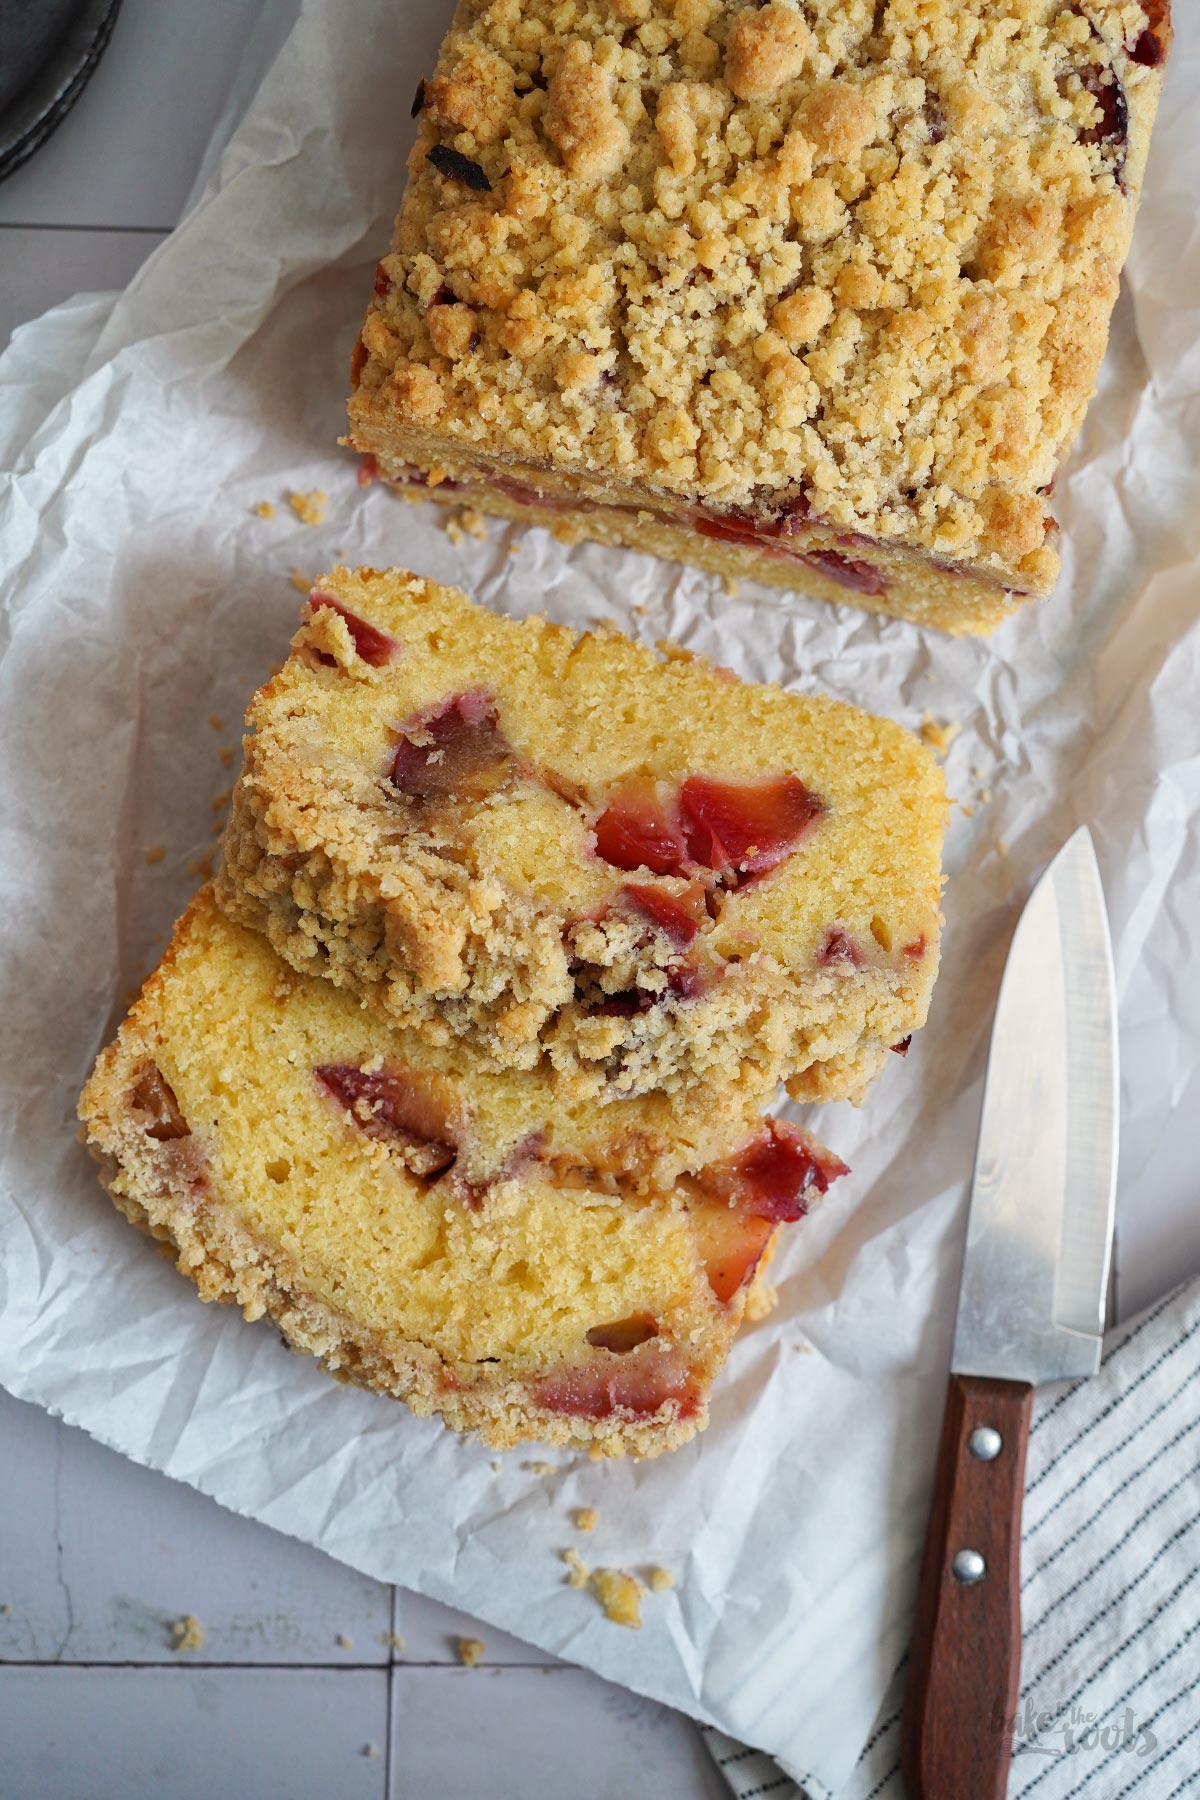 Six Spices Damson Plum Pound Cake | Bake to the roots